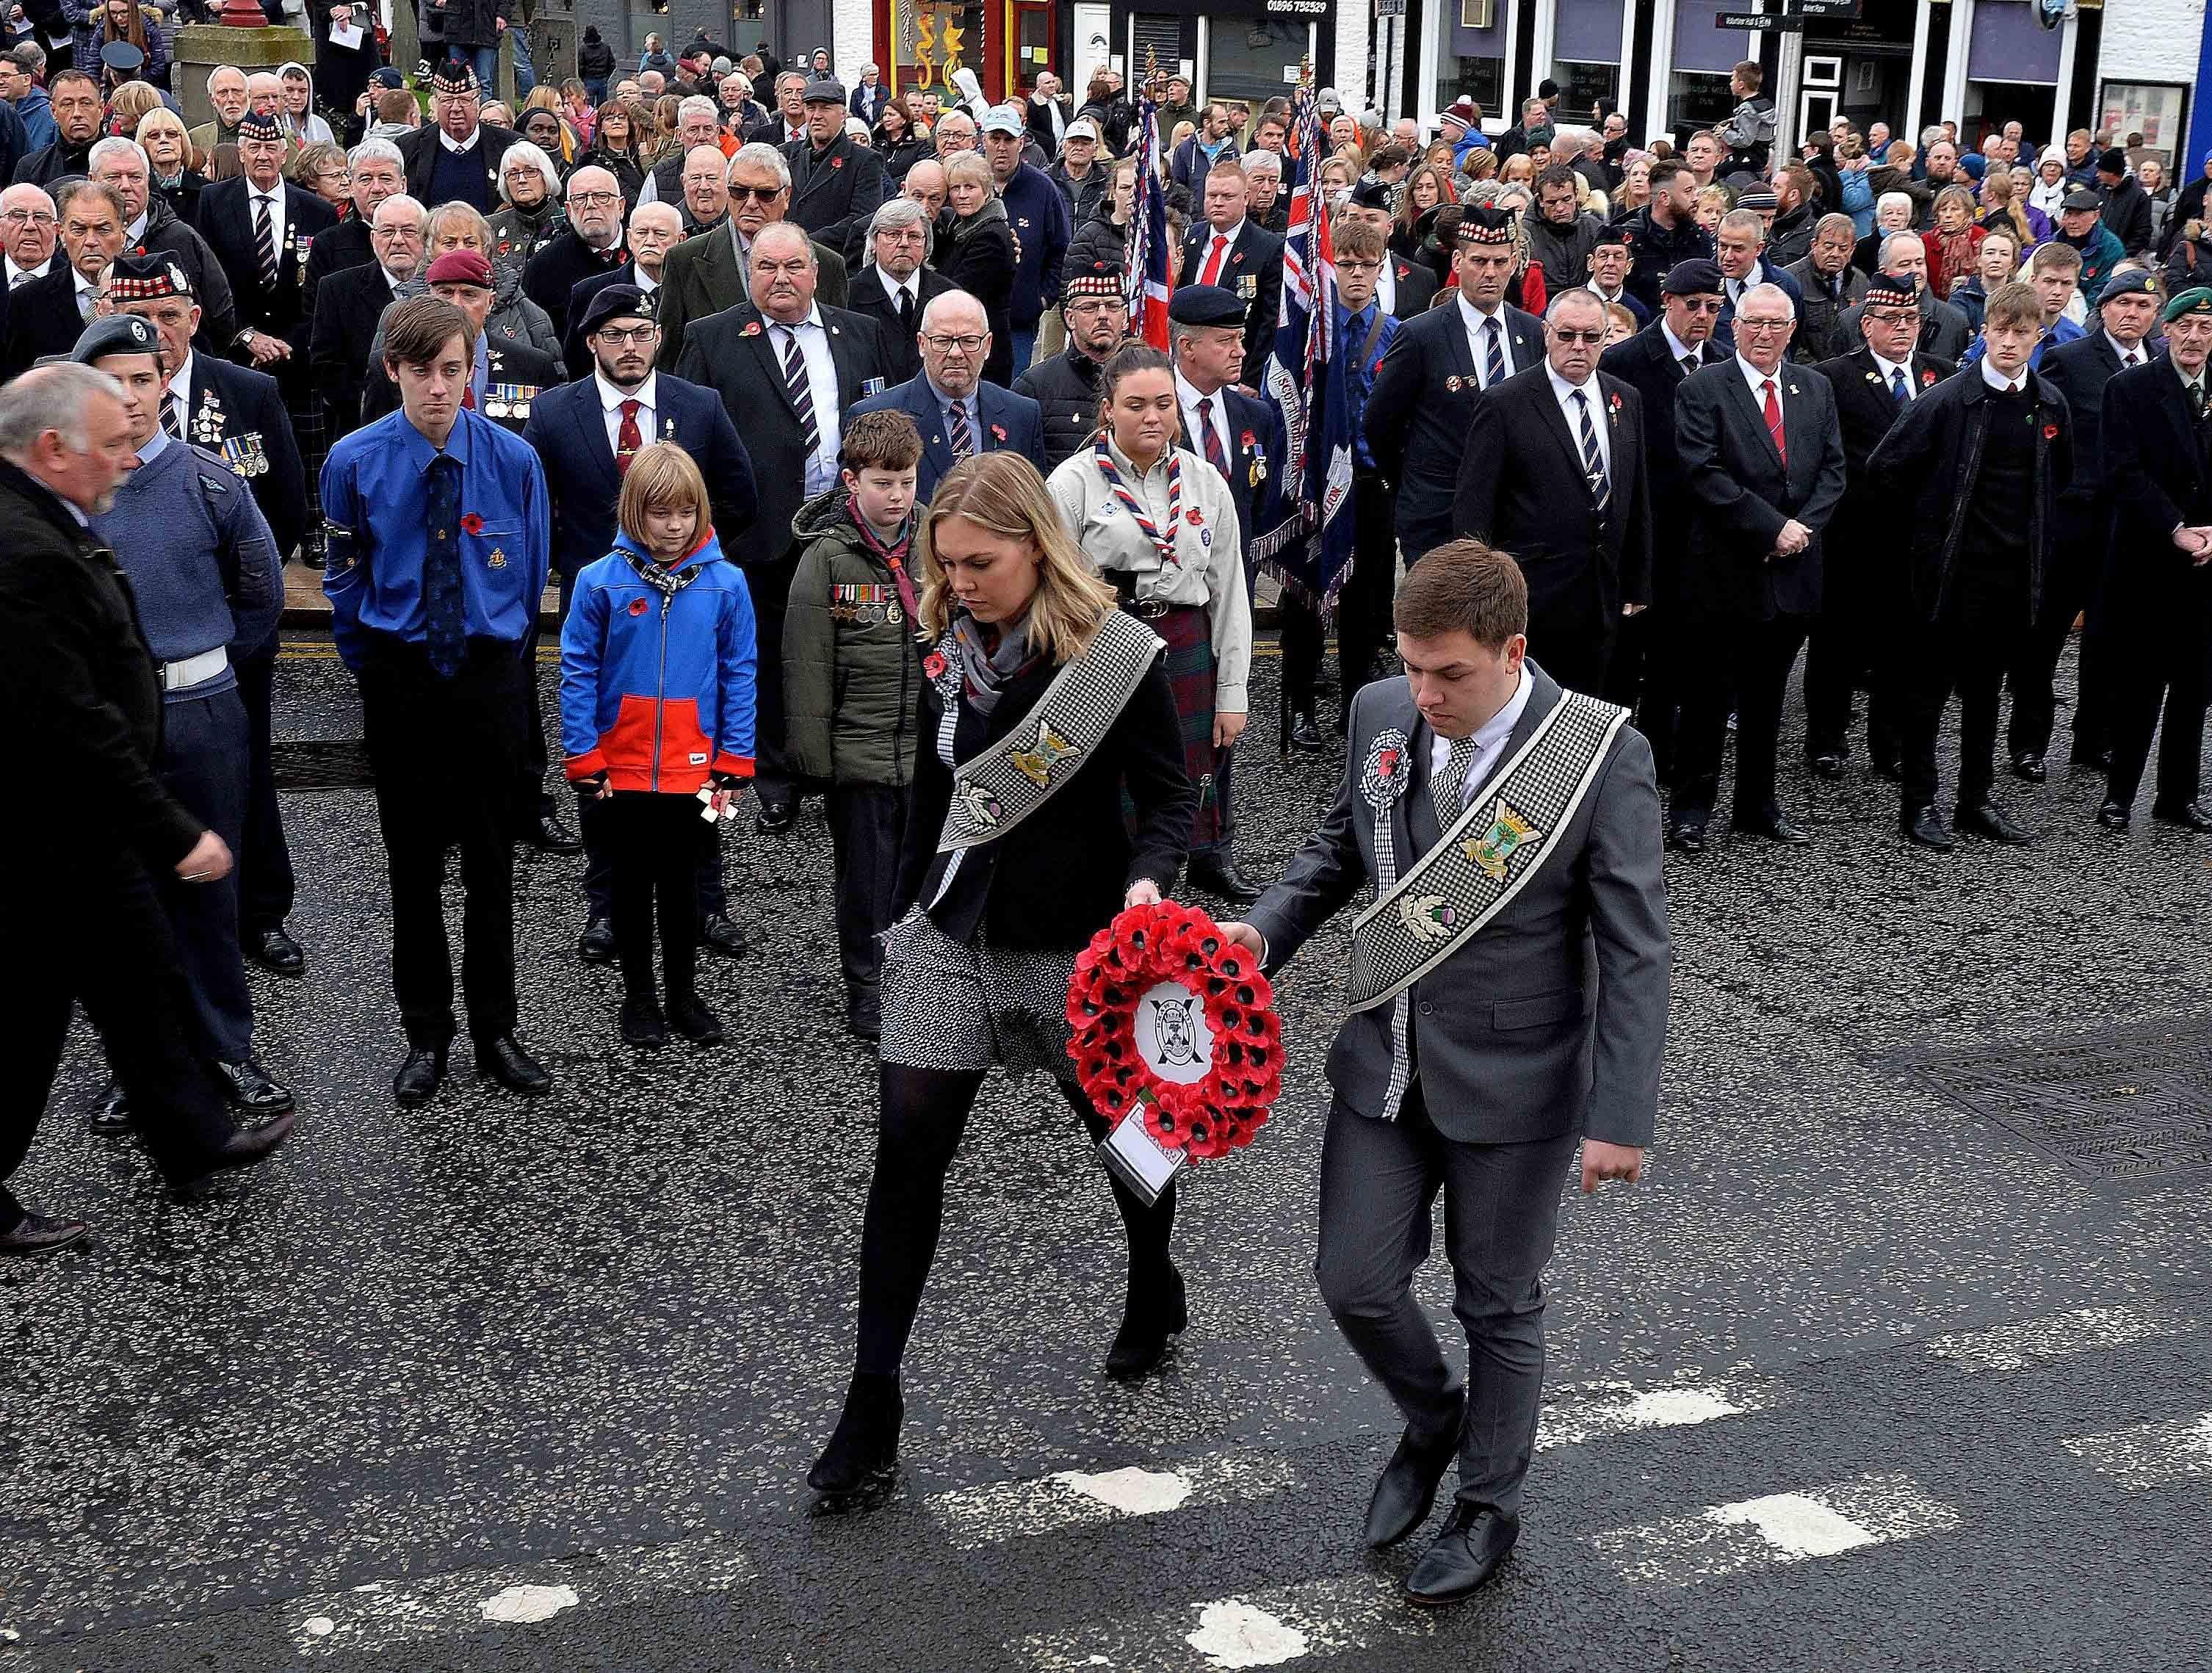 Braw Lad Robbie Lowrie and Braw Lass Nicola Laing lay a wreath in Galashiels.